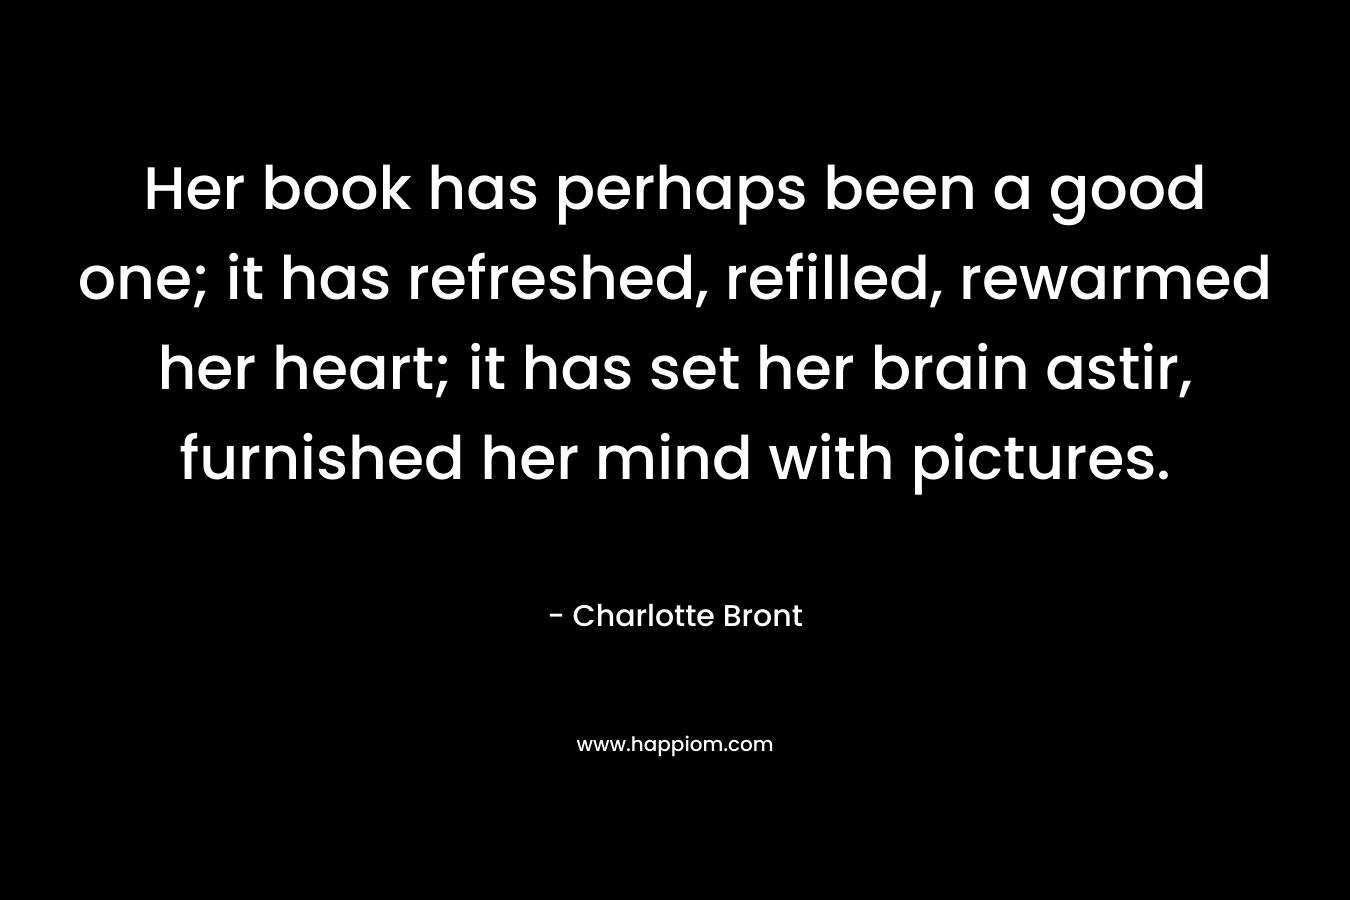 Her book has perhaps been a good one; it has refreshed, refilled, rewarmed her heart; it has set her brain astir, furnished her mind with pictures. – Charlotte Bront